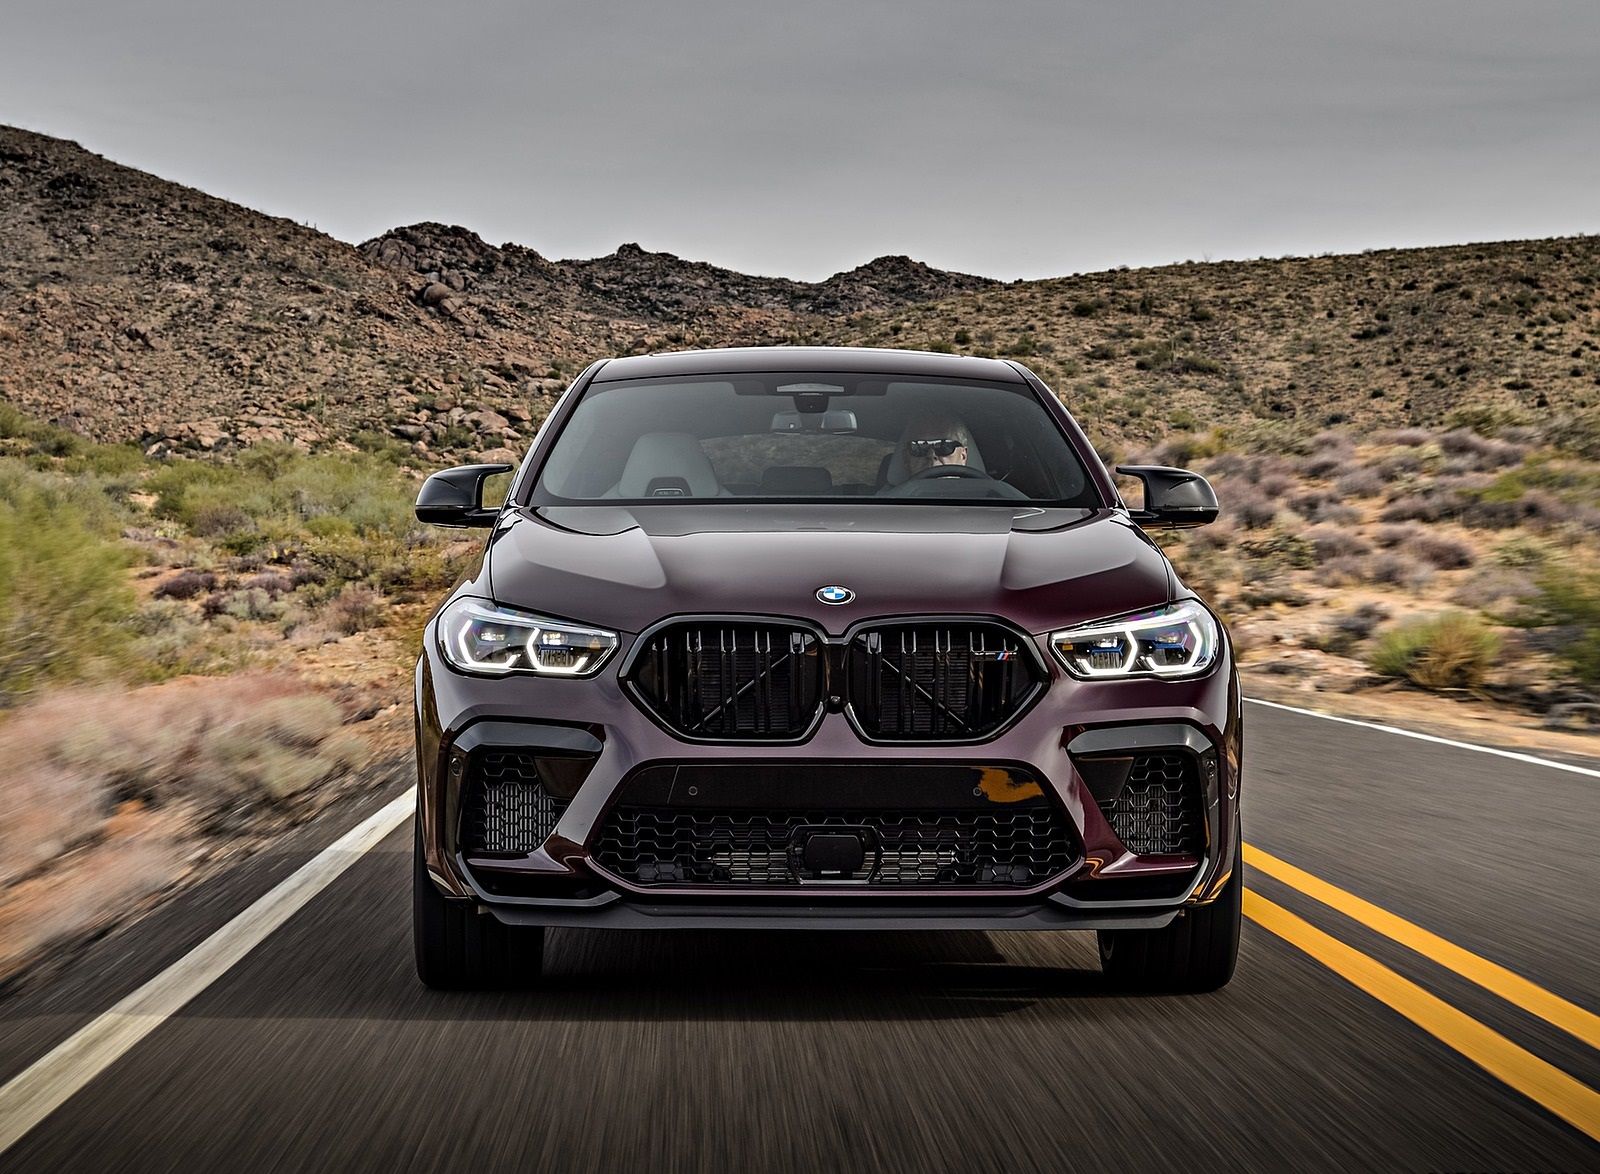 X6 competition. BMW x6m 2020. БМВ x6m Competition 2020. BMW x6m 2022. BMW x6m Competition 2021.